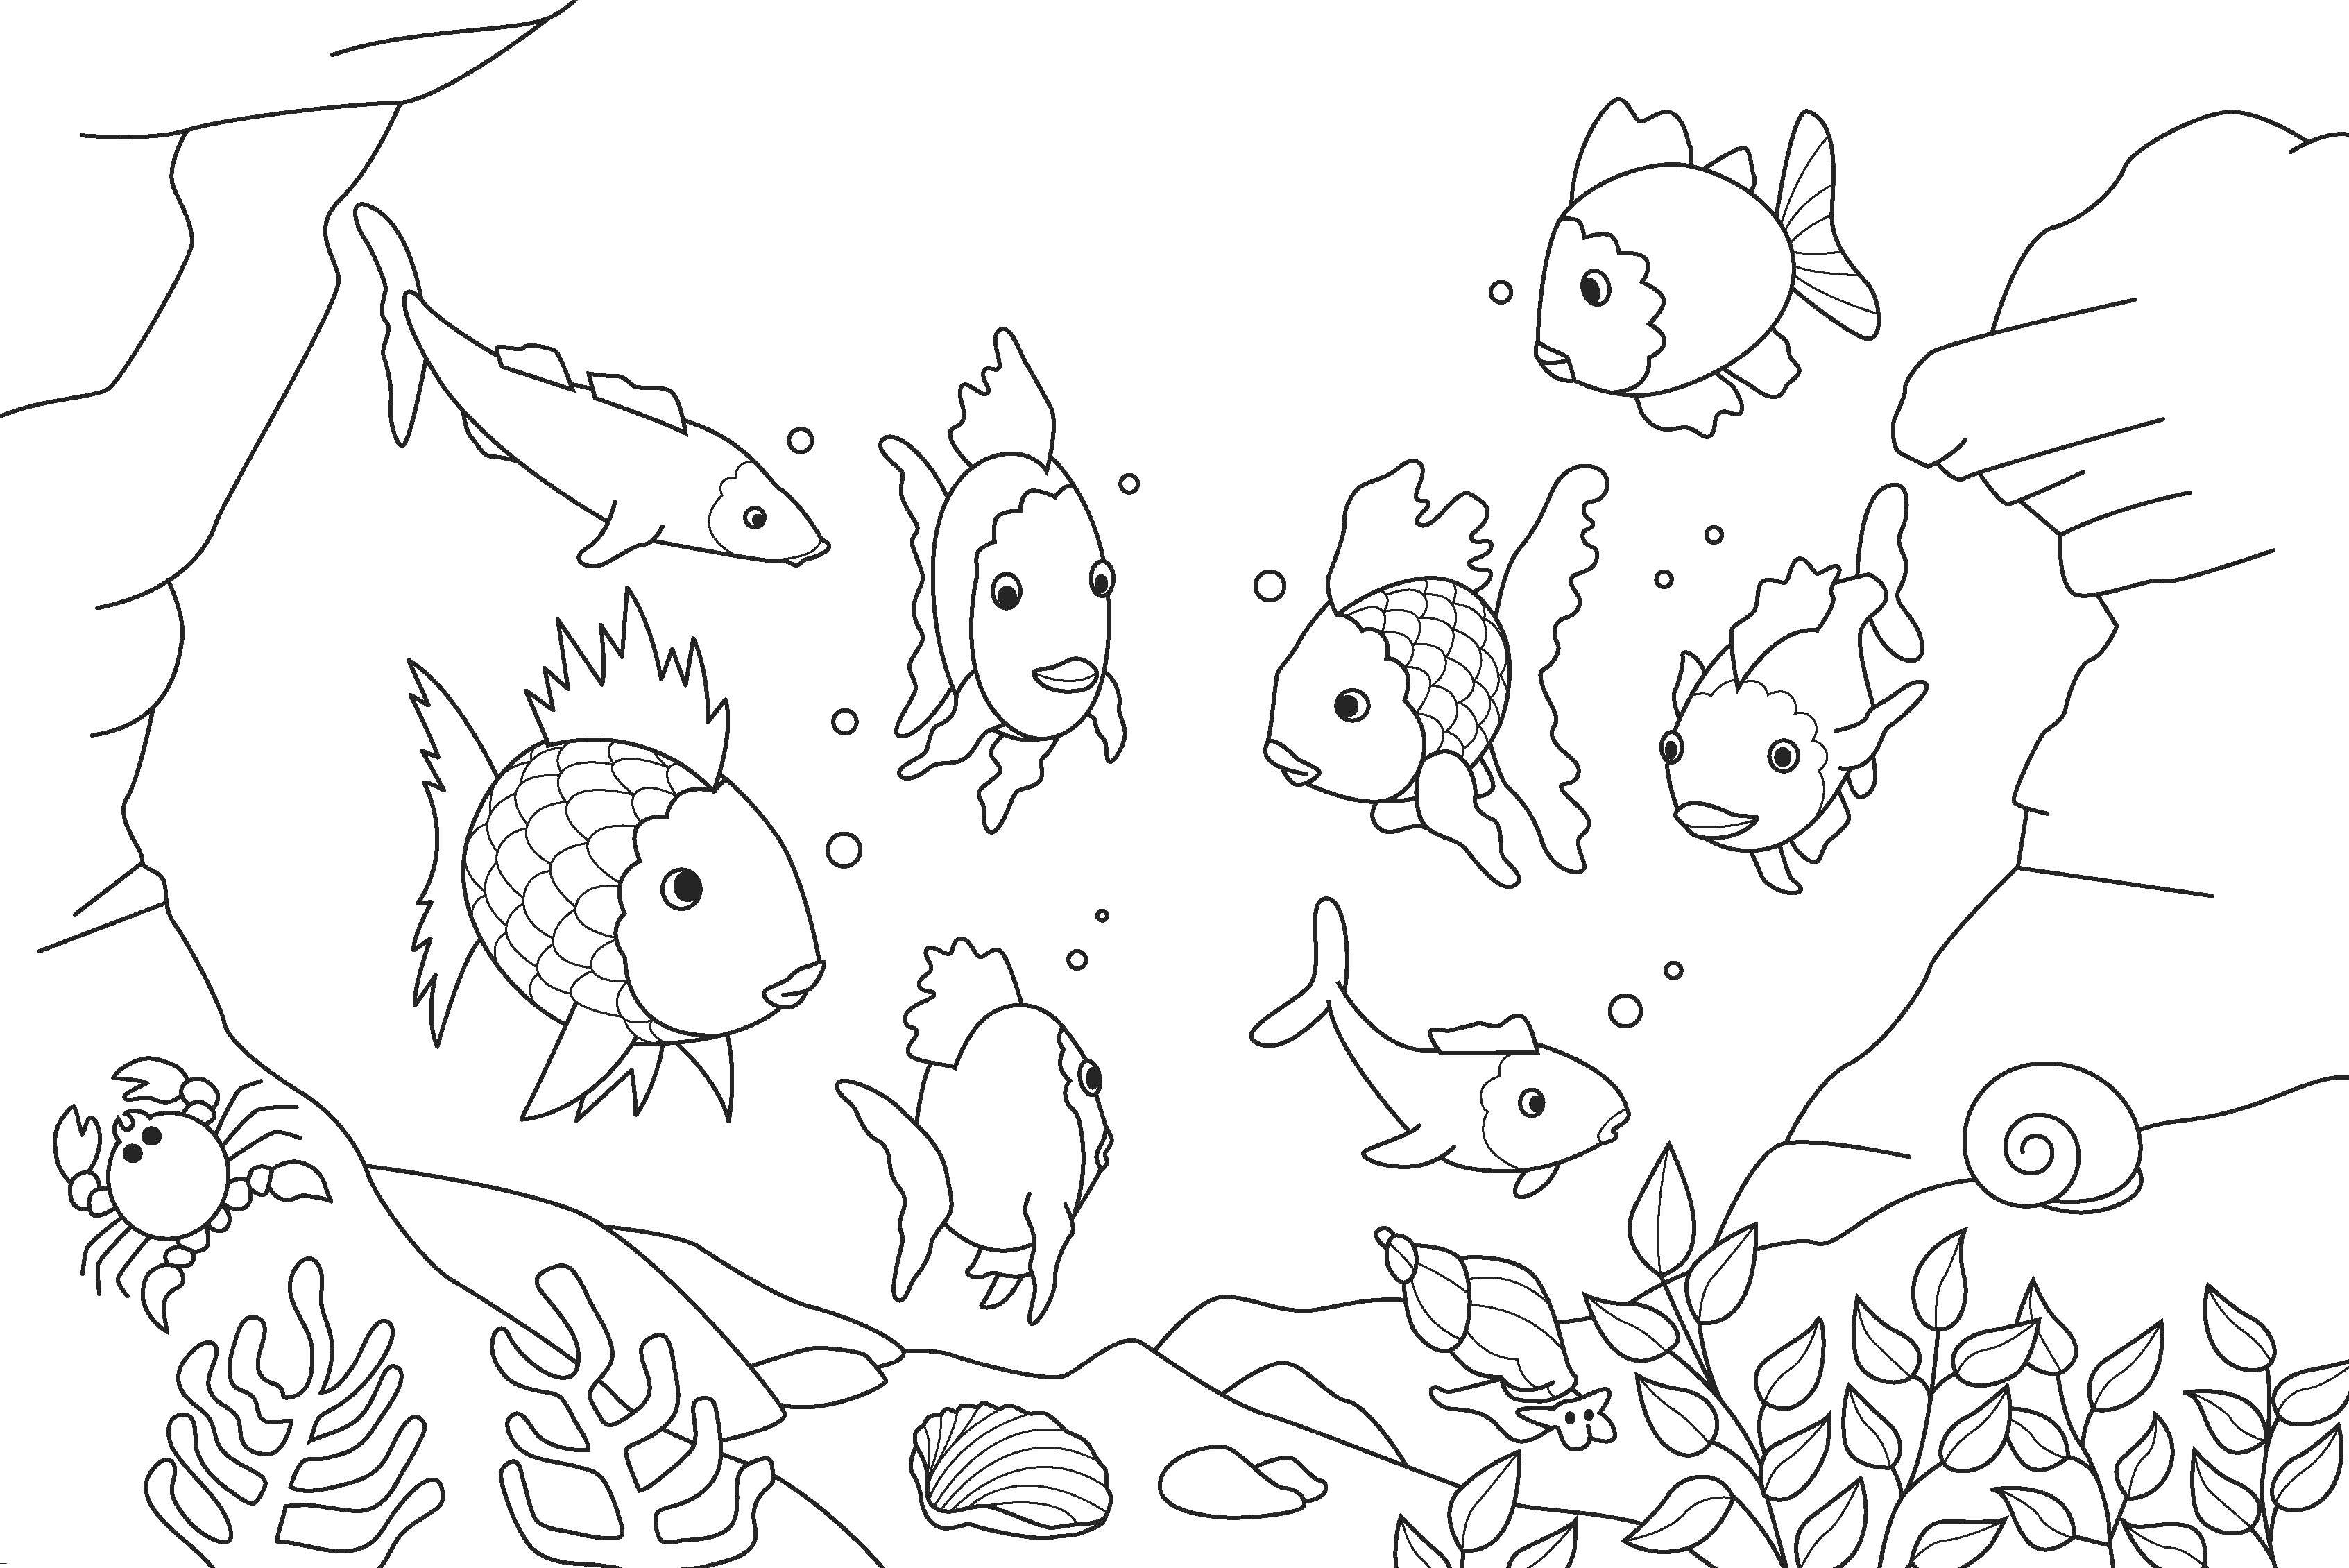 Coloring Fish on the bottom. Category marine. Tags:  marine, sea, fish.